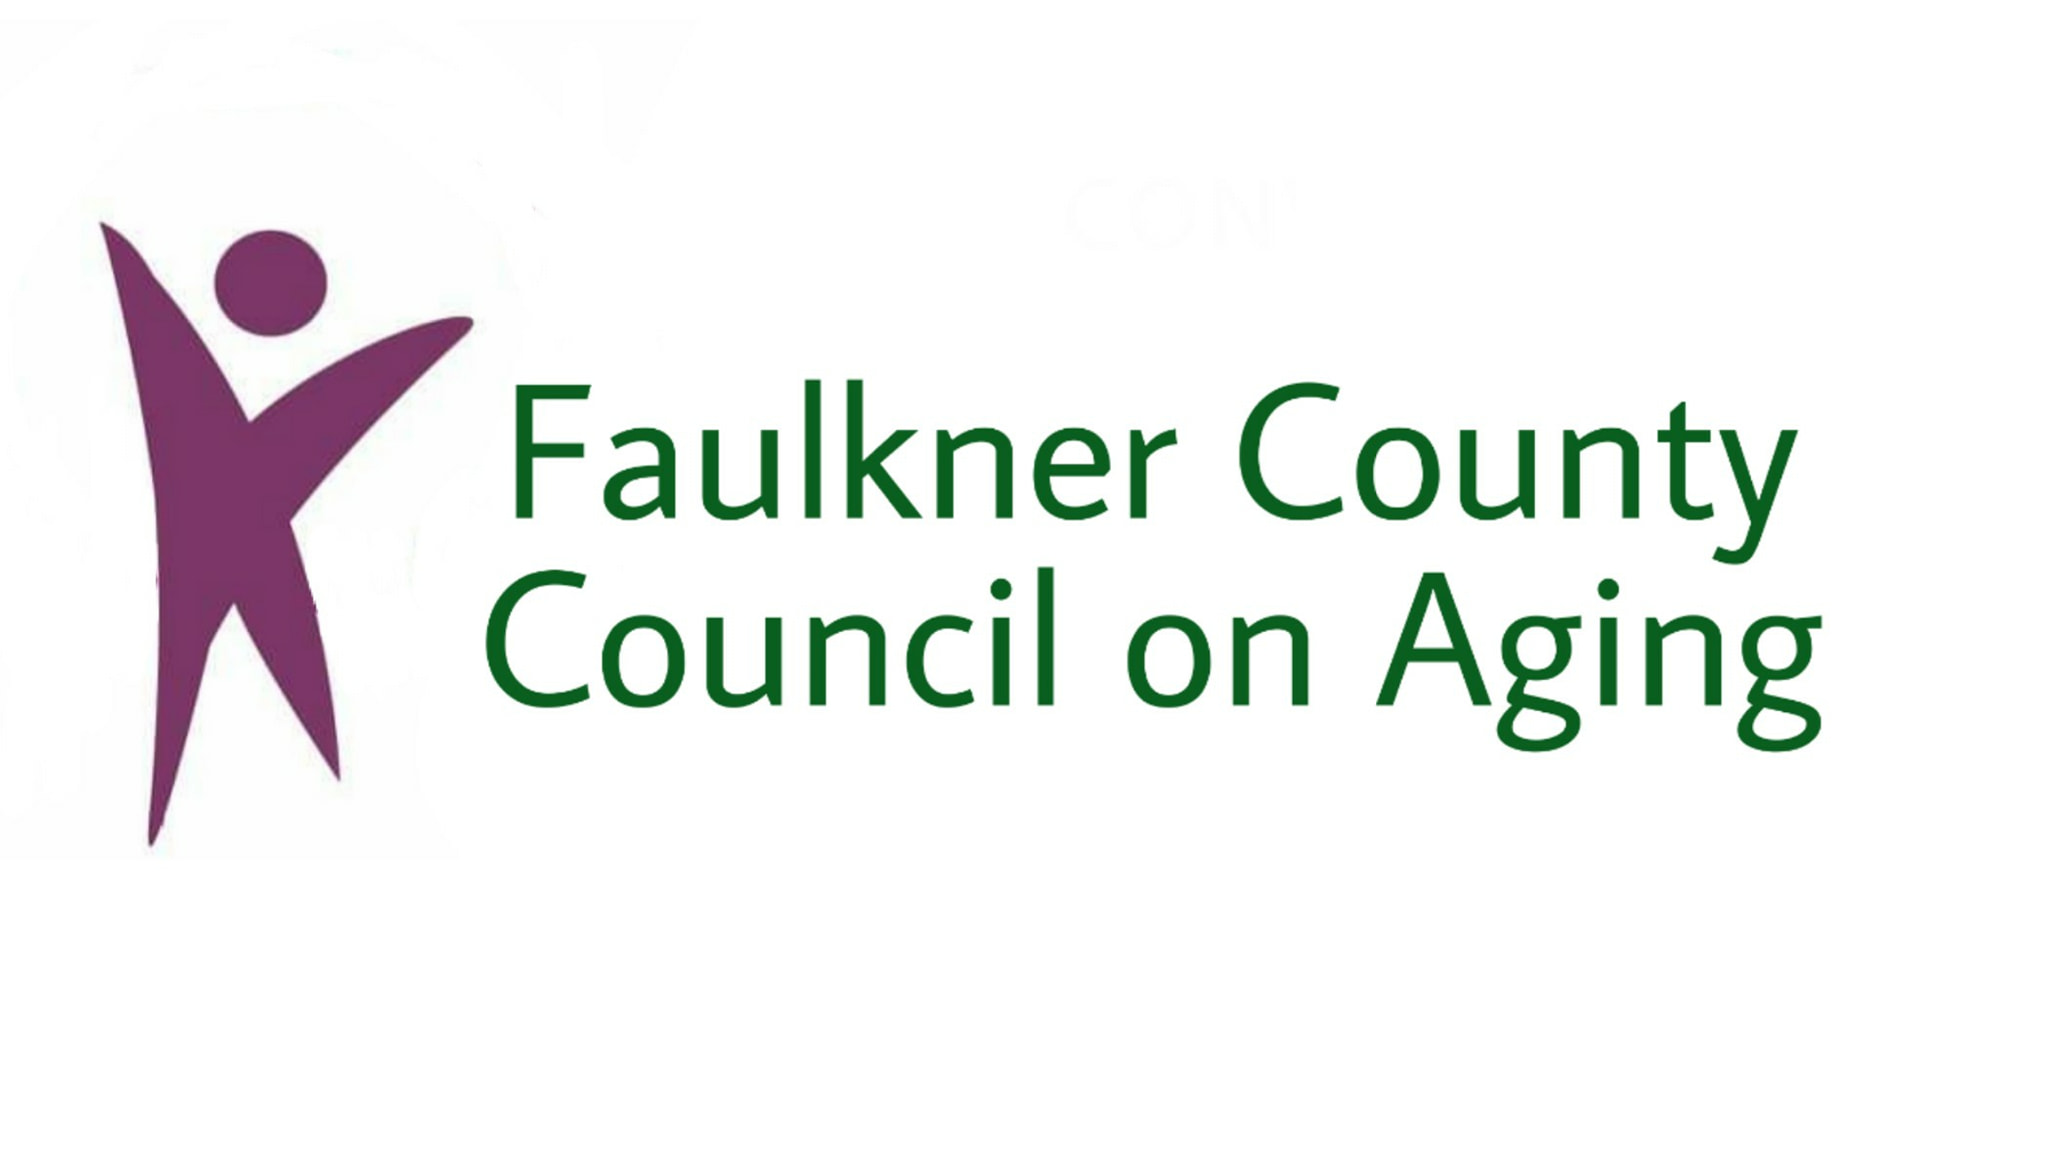 Faulkner County Council on Aging logo